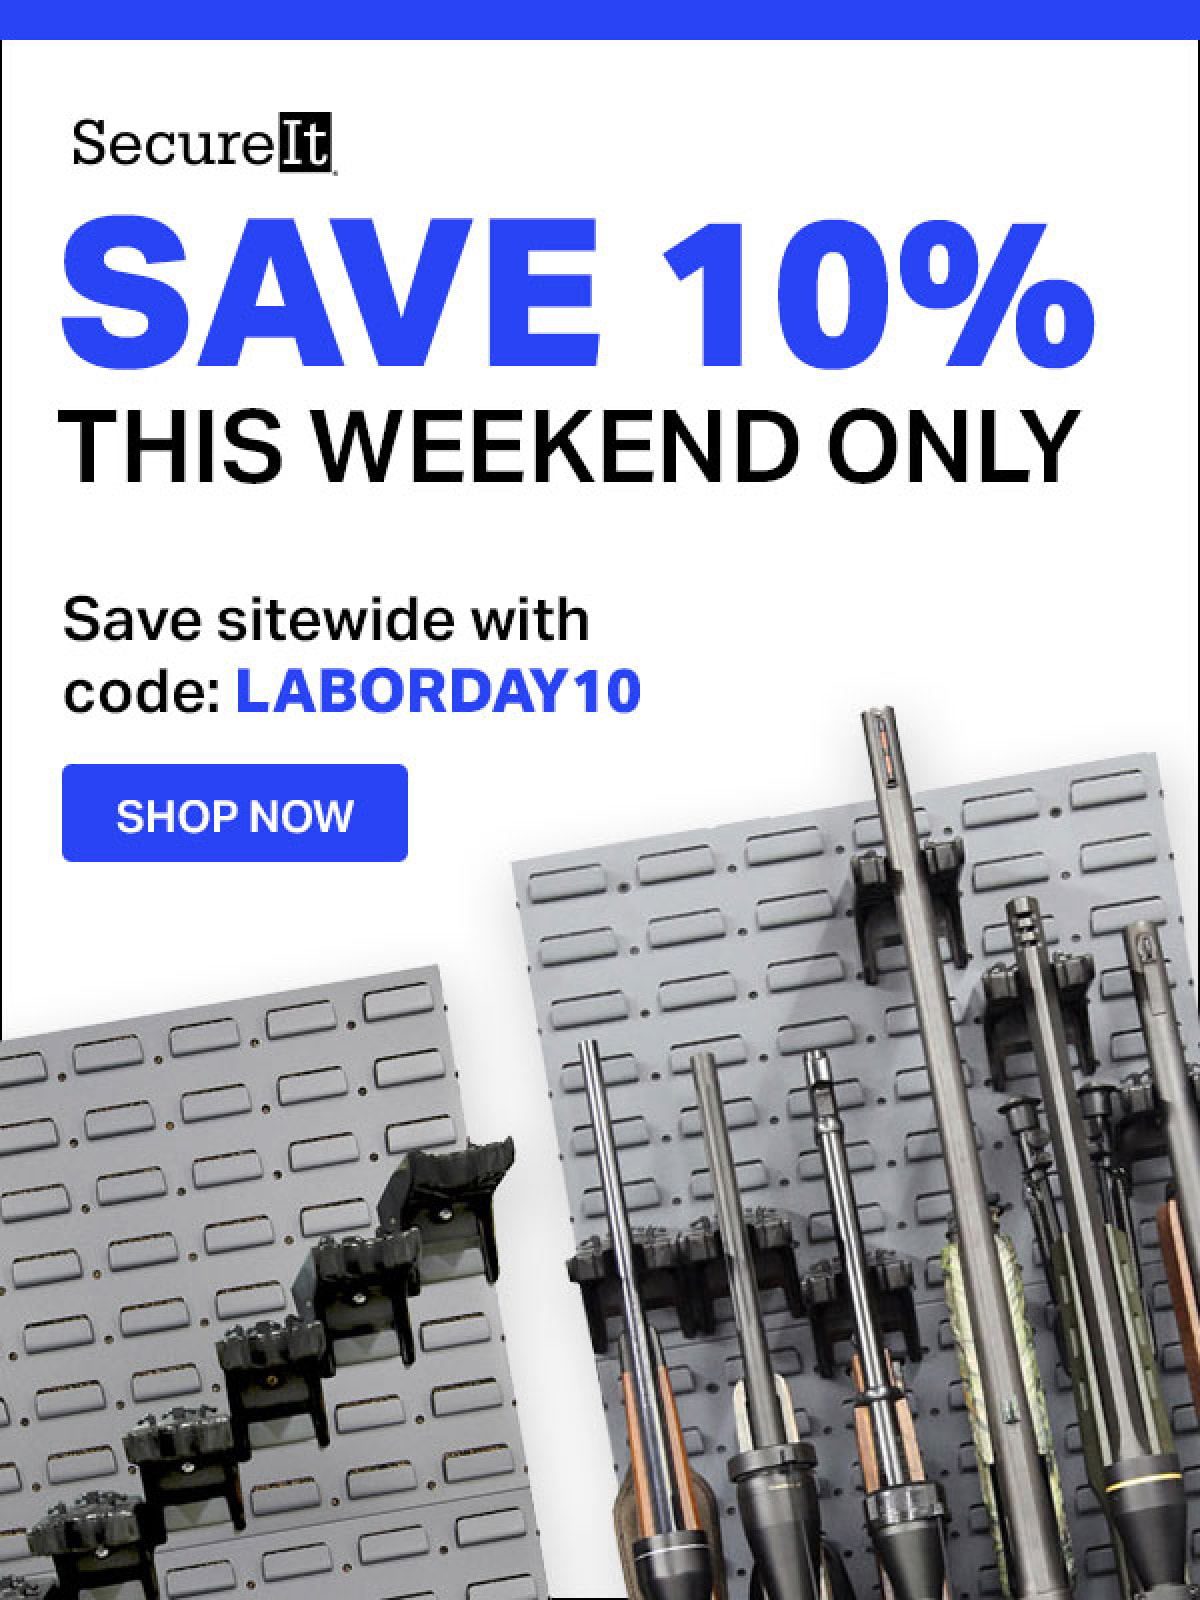 Save 10% this weekend only!